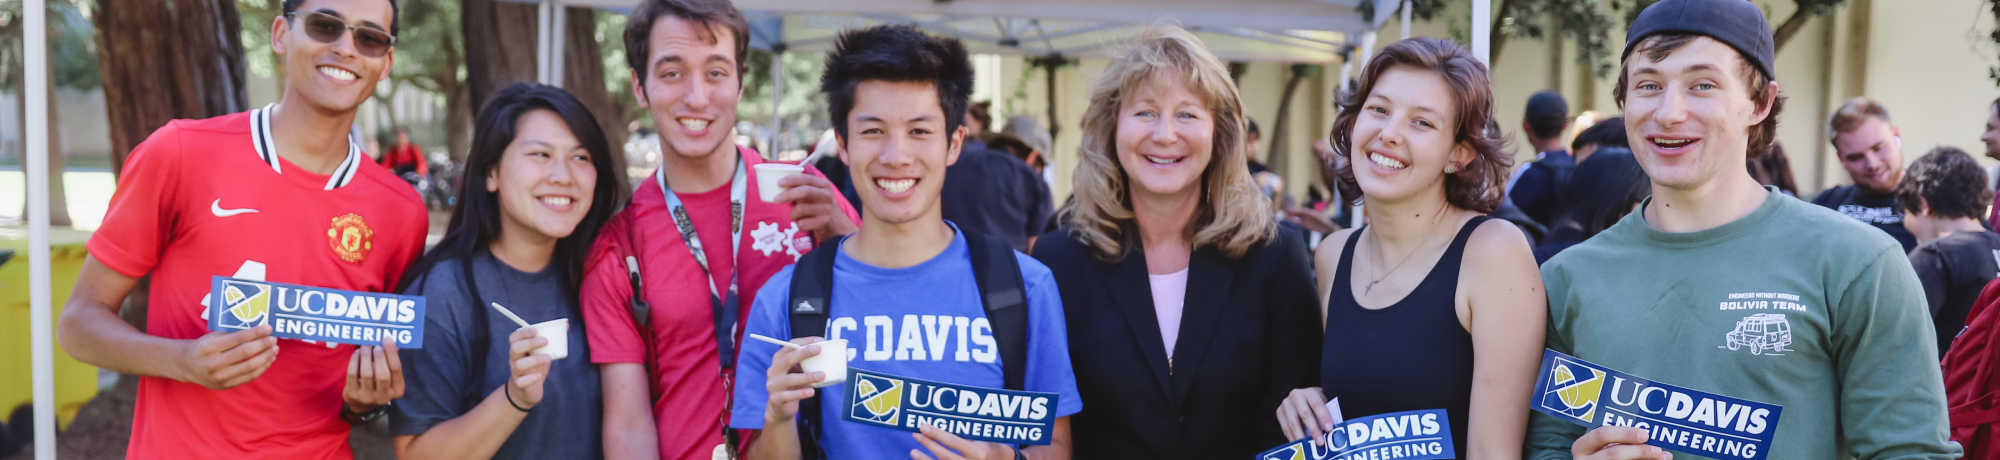 Students and Dean Curtis at Ice Cream Social 2019